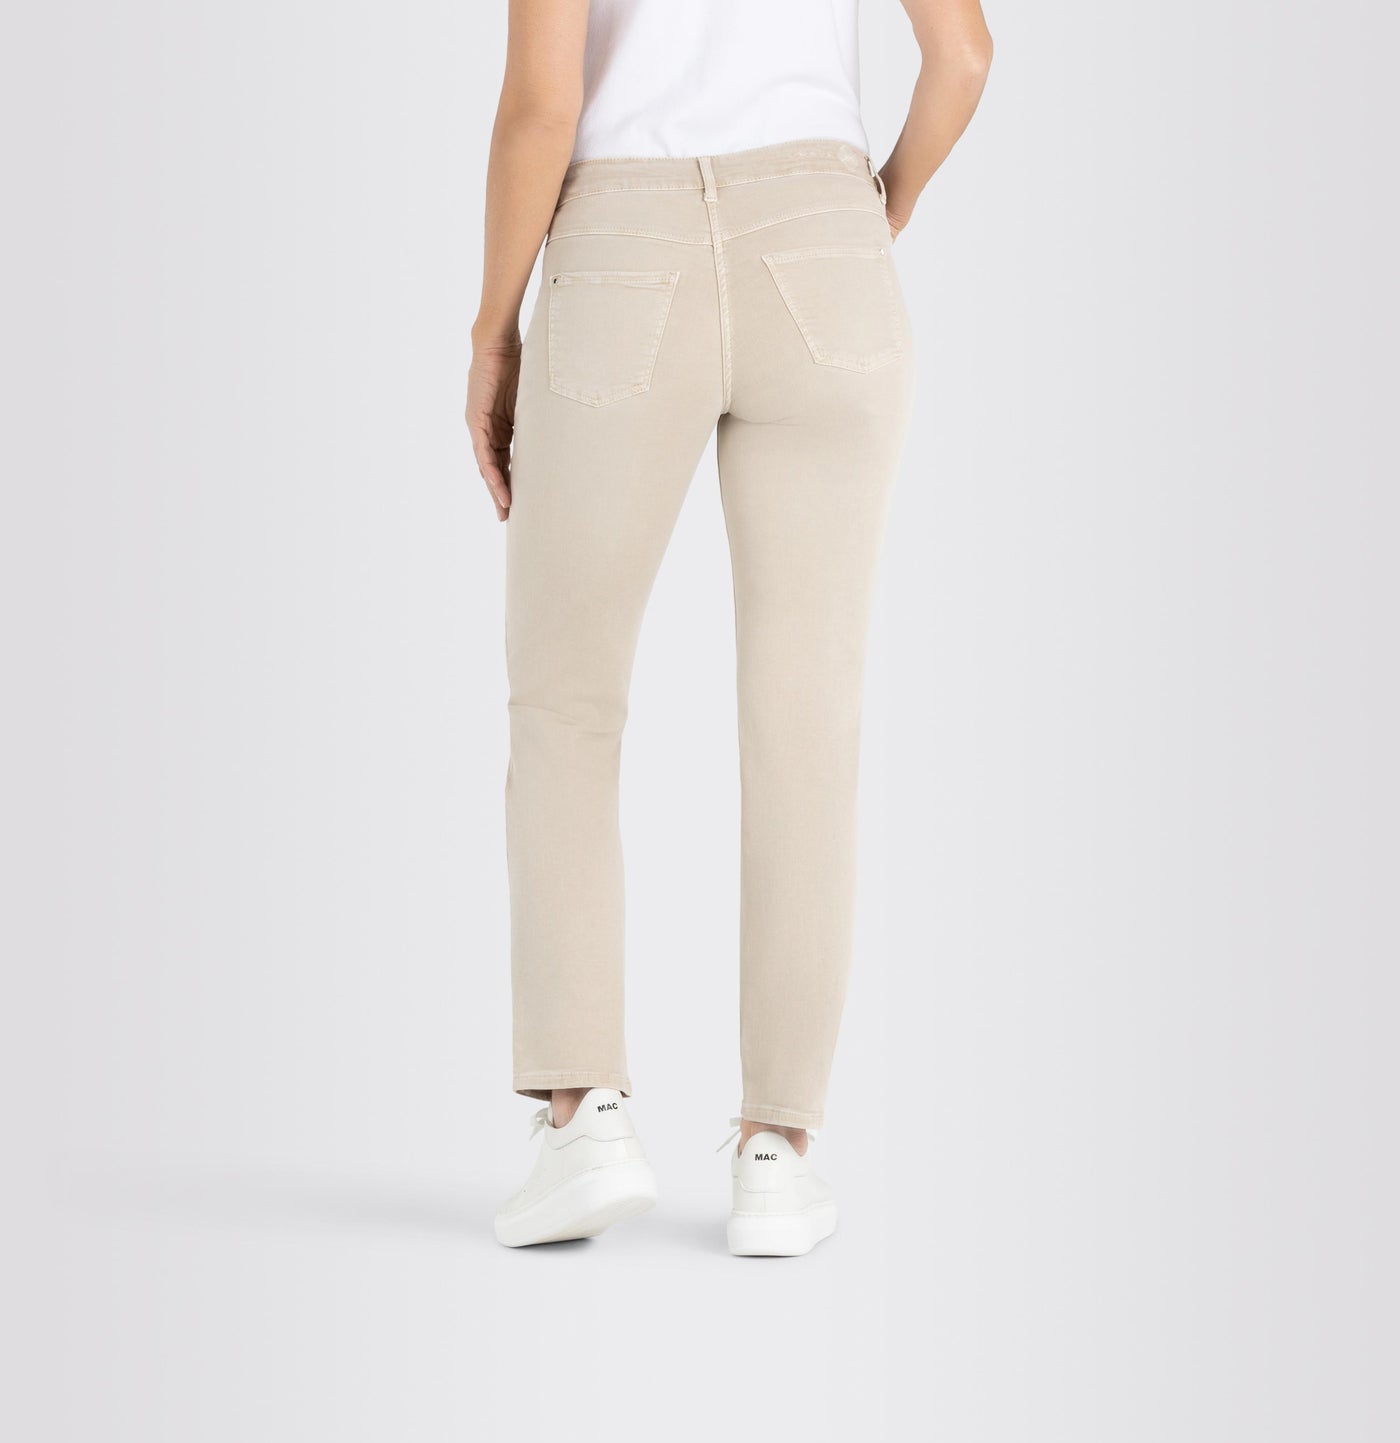 Dream Jean Smoothly Beige Color 214W 30" Inseam